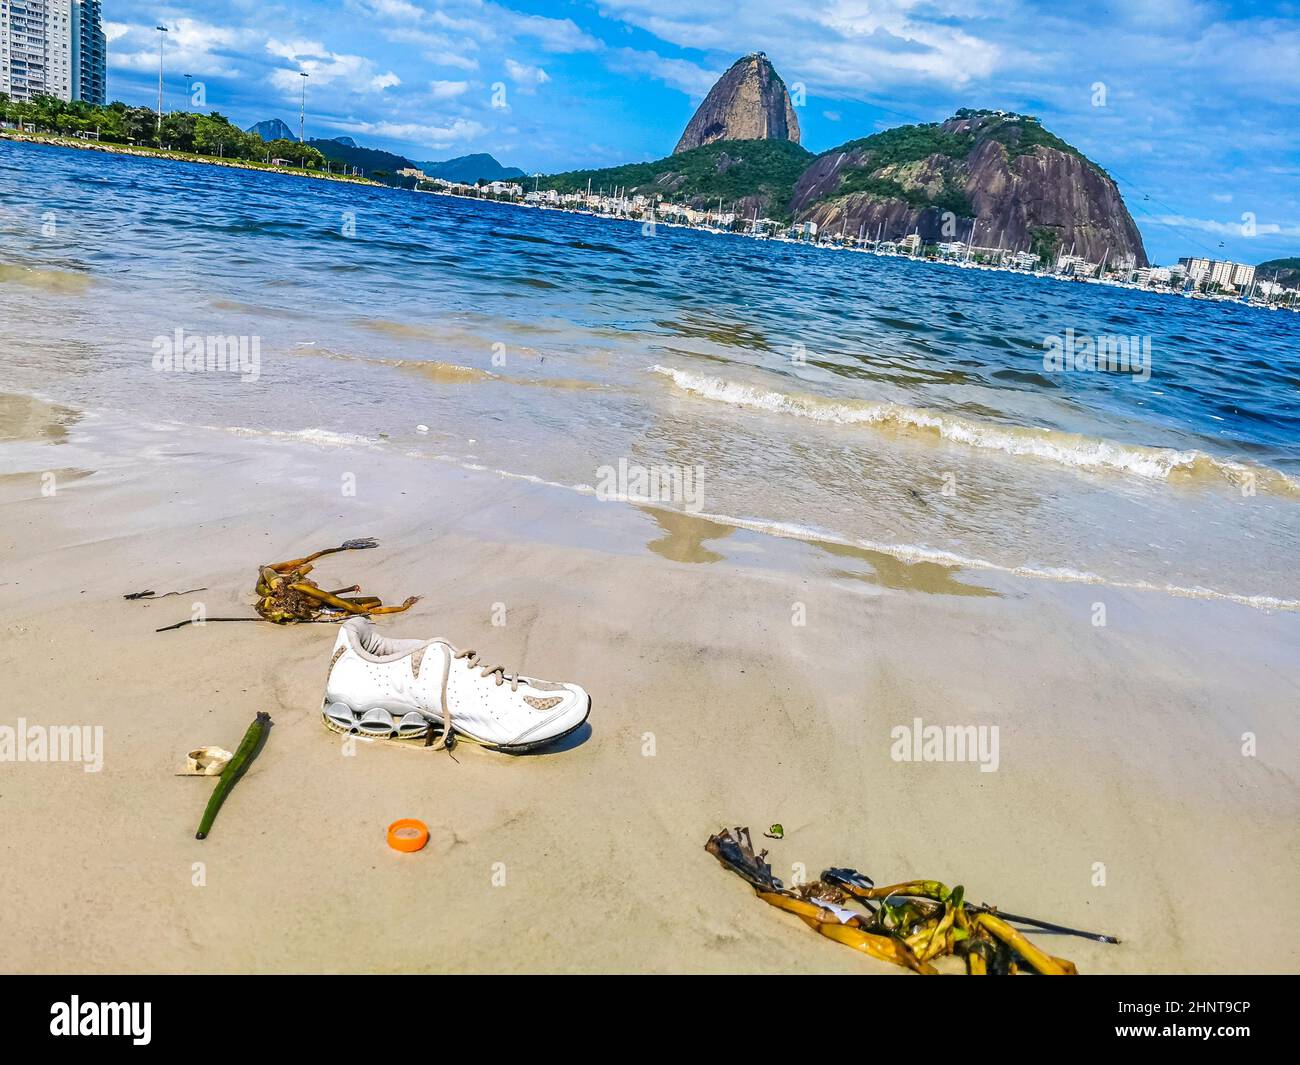 Shoes stranded washed up garbage pollution on beach Brazil. Stock Photo